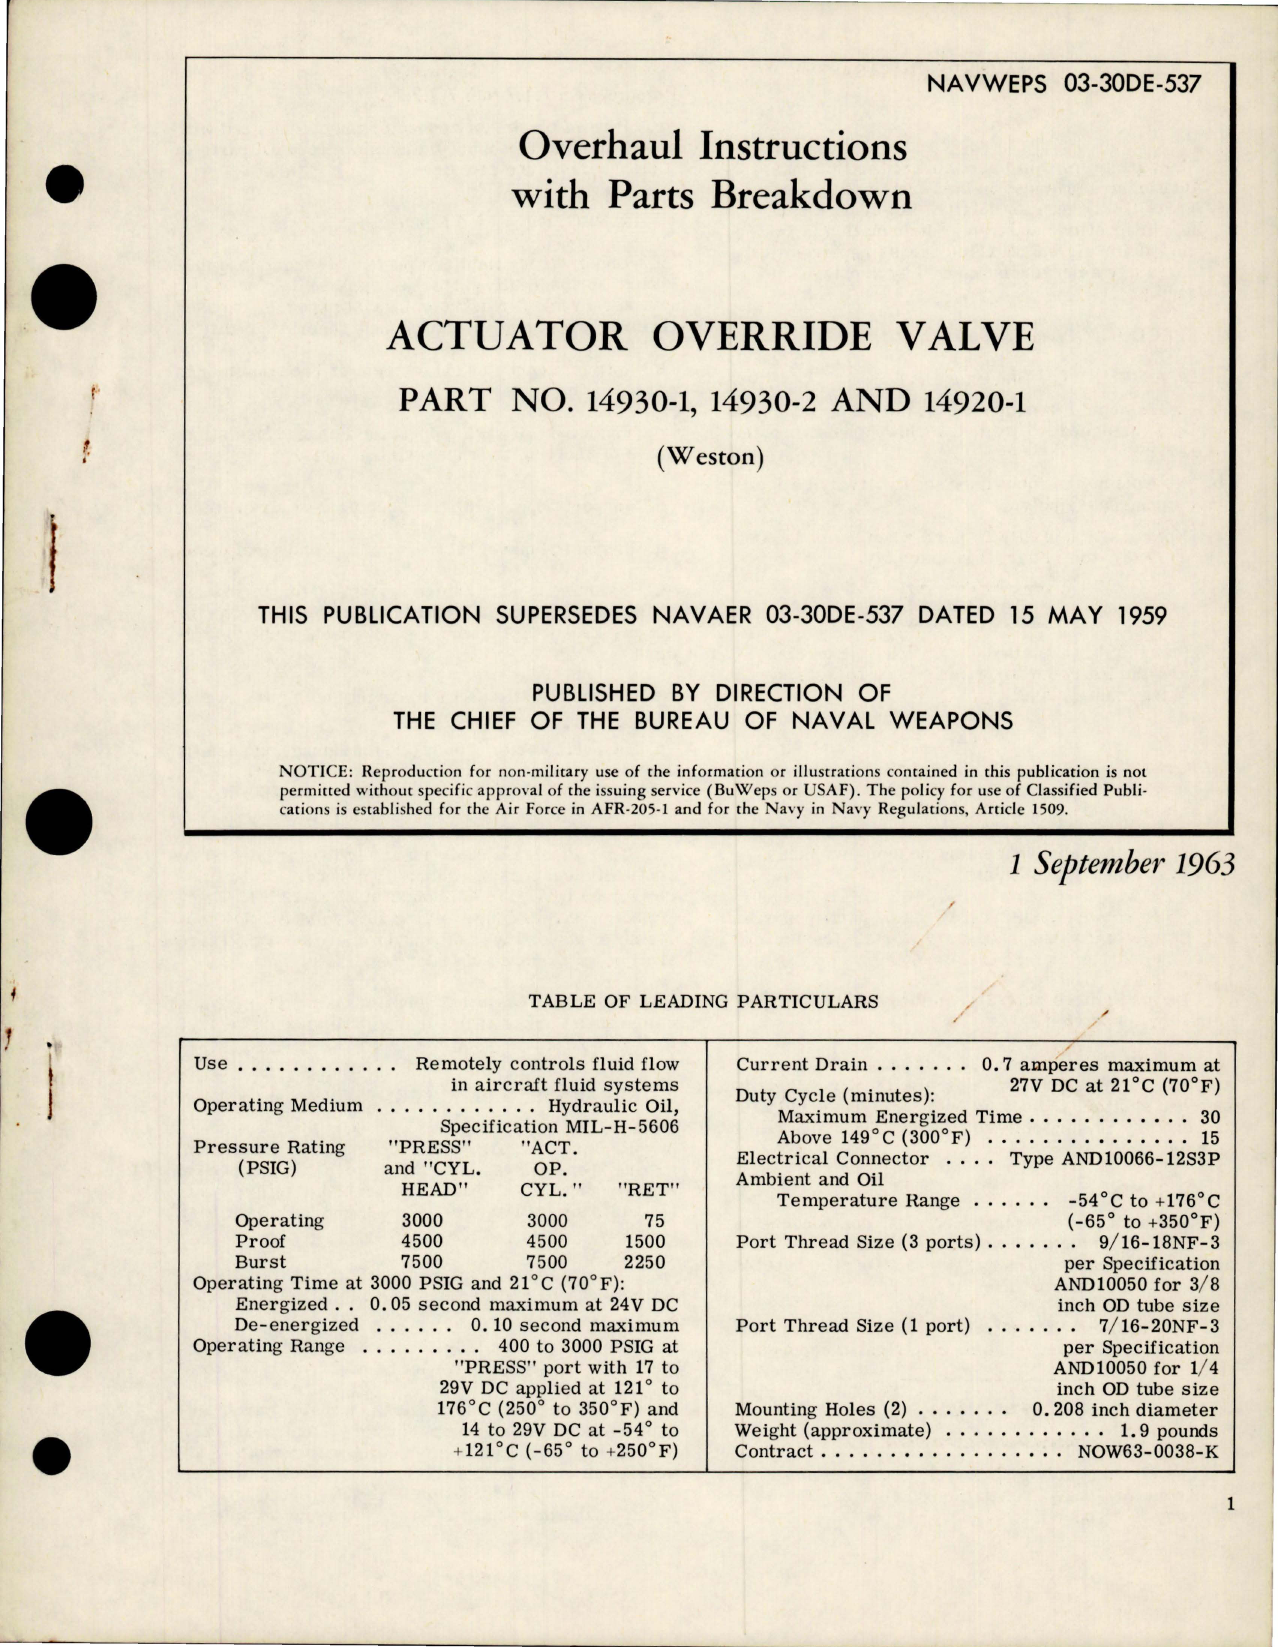 Sample page 1 from AirCorps Library document: Overhaul Instructions with Parts Breakdown for Actuator Override Valve - Parts 14930-1, 14930-2 and 14920-1